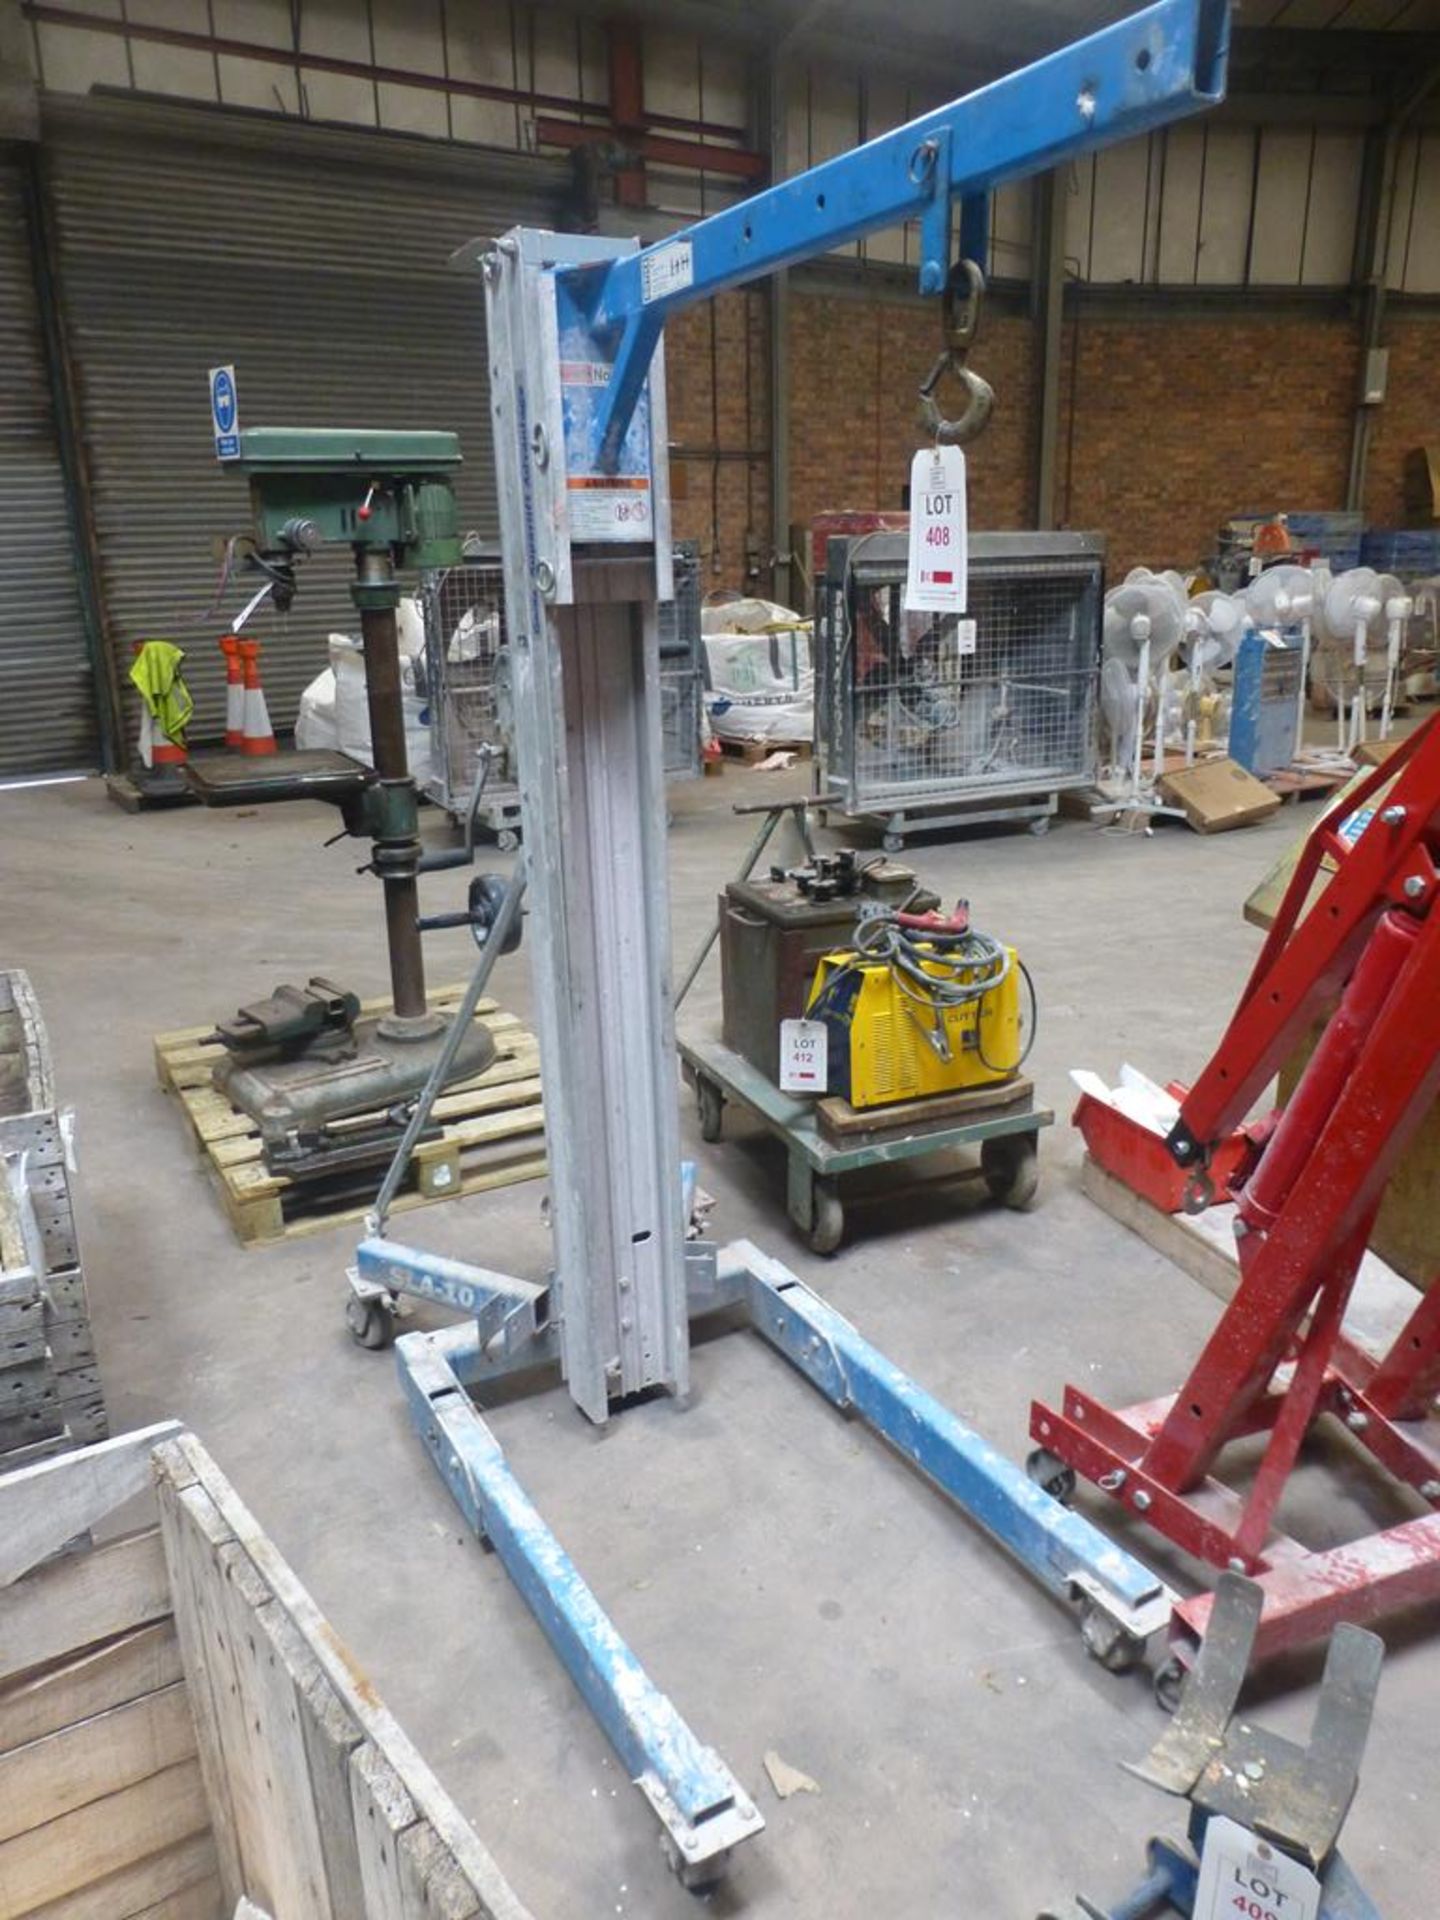 Genie Superlift Advantage mobile material lifter, 1m boom length